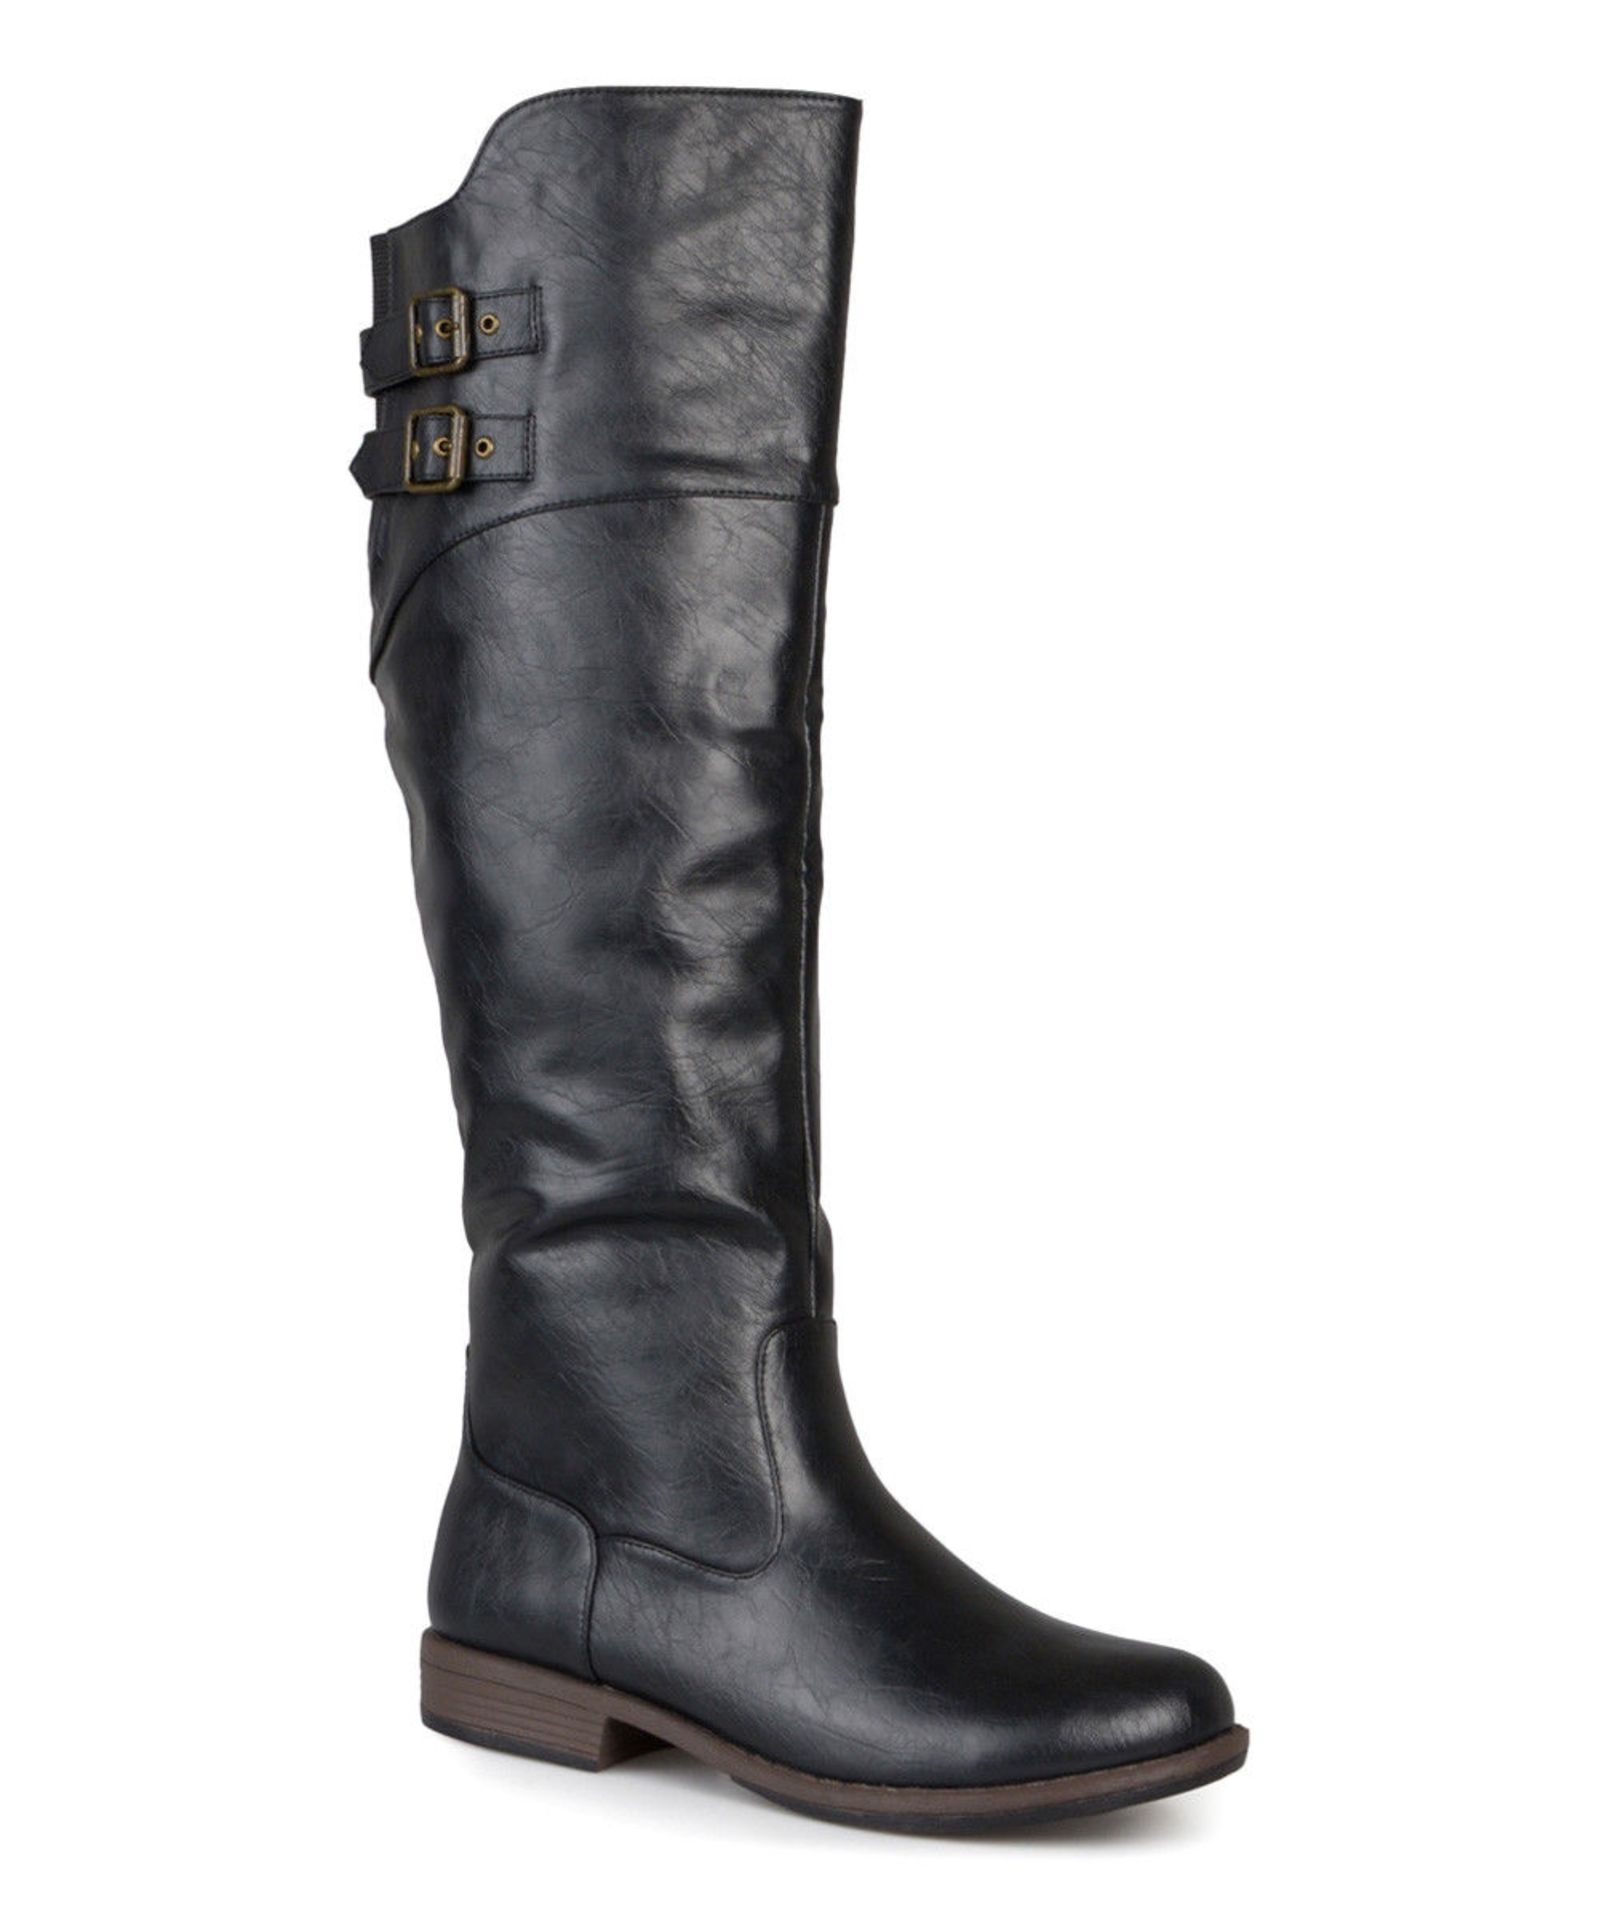 Journee Collection Black Tori Riding Boot (Uk Size 7:Us Size 9) (New with box) [Ref: 14251407-I-